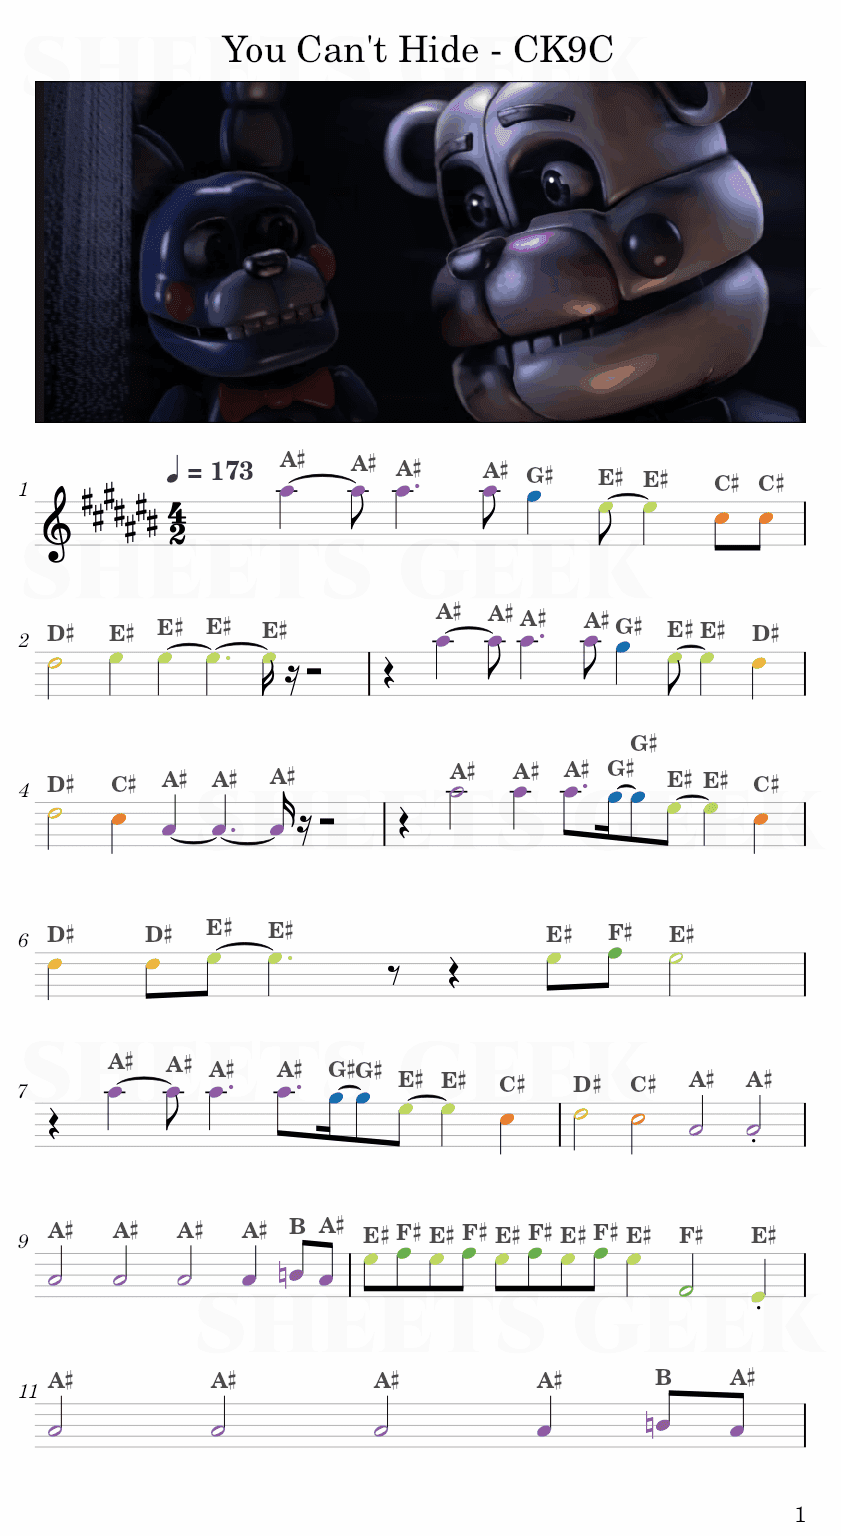 You Can't Hide - CK9C (FNAF SISTER LOCATION SONG) Easy Sheet Music Free for piano, keyboard, flute, violin, sax, cello page 1